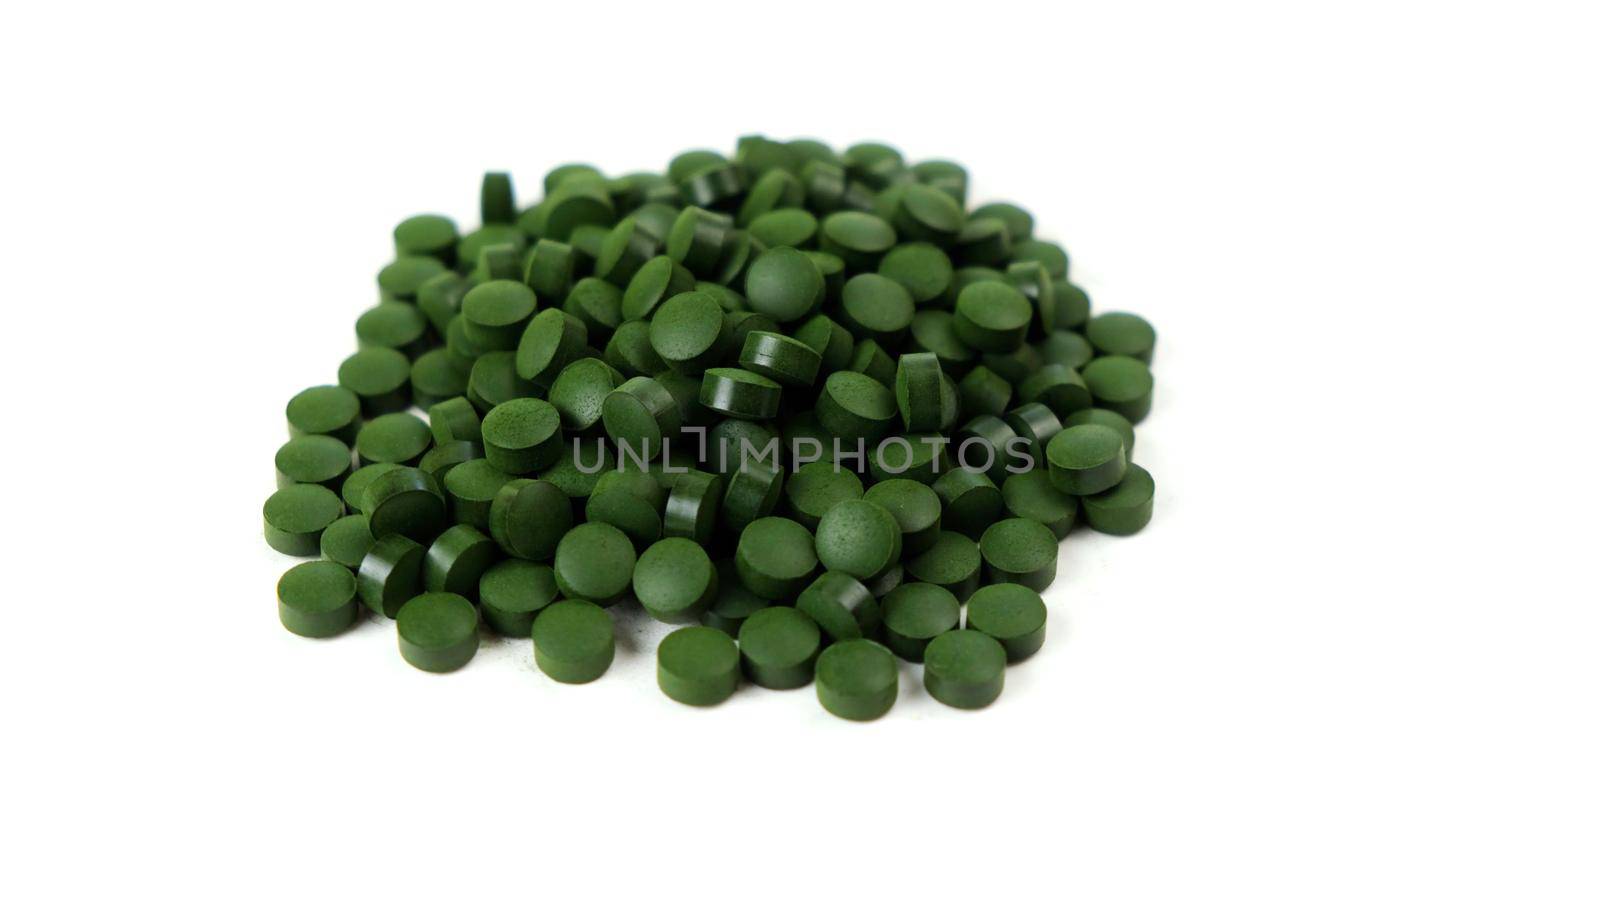 Spirulina algae tablets isolated on white background. Nutritional supplements, vitamins and health concept by chelmicky